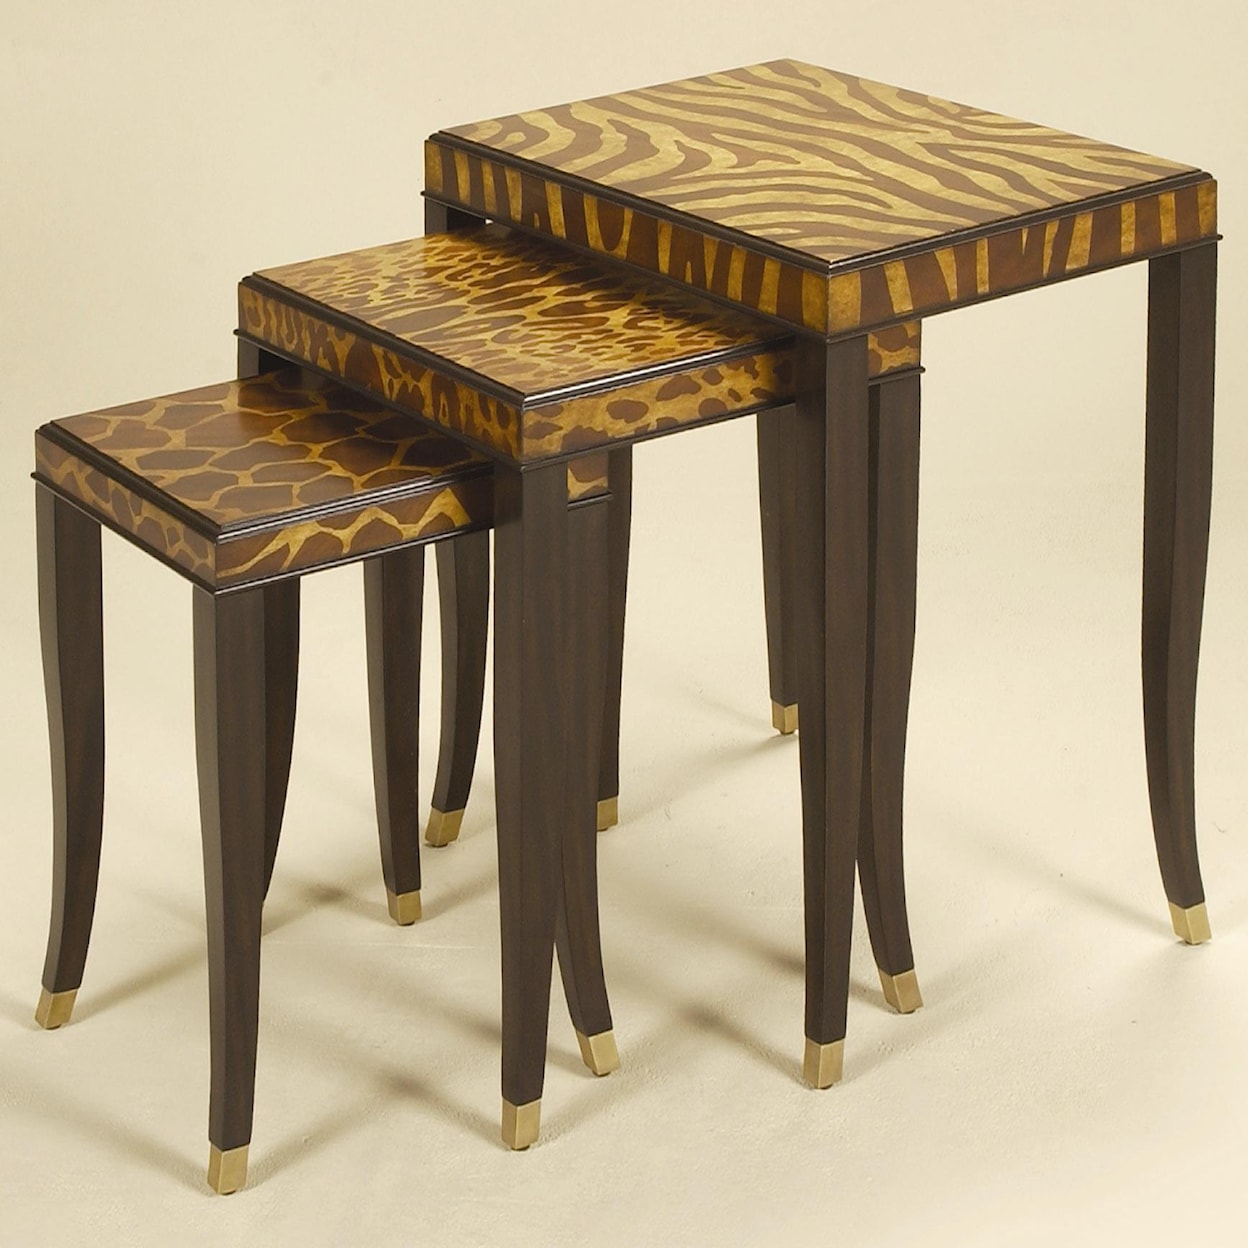 Maitland-Smith End Tables Set of Three Ebony Finished Nest of Tables